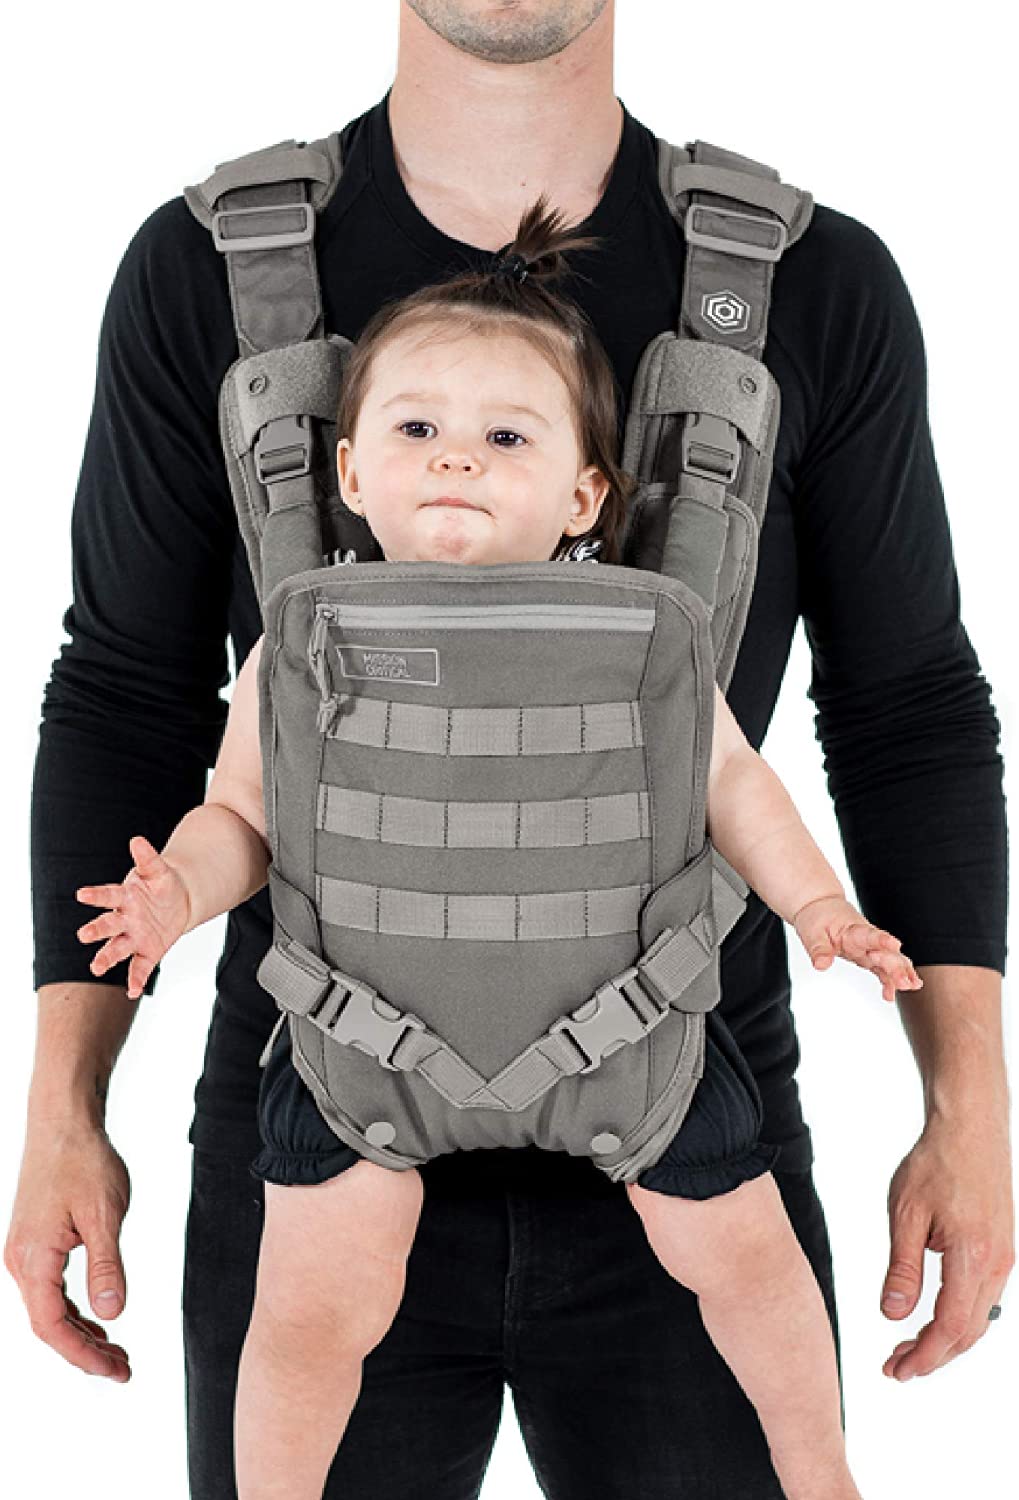 Mission Critical S.01 Action Baby Carrier, Baby Gear for Dads (Gray)